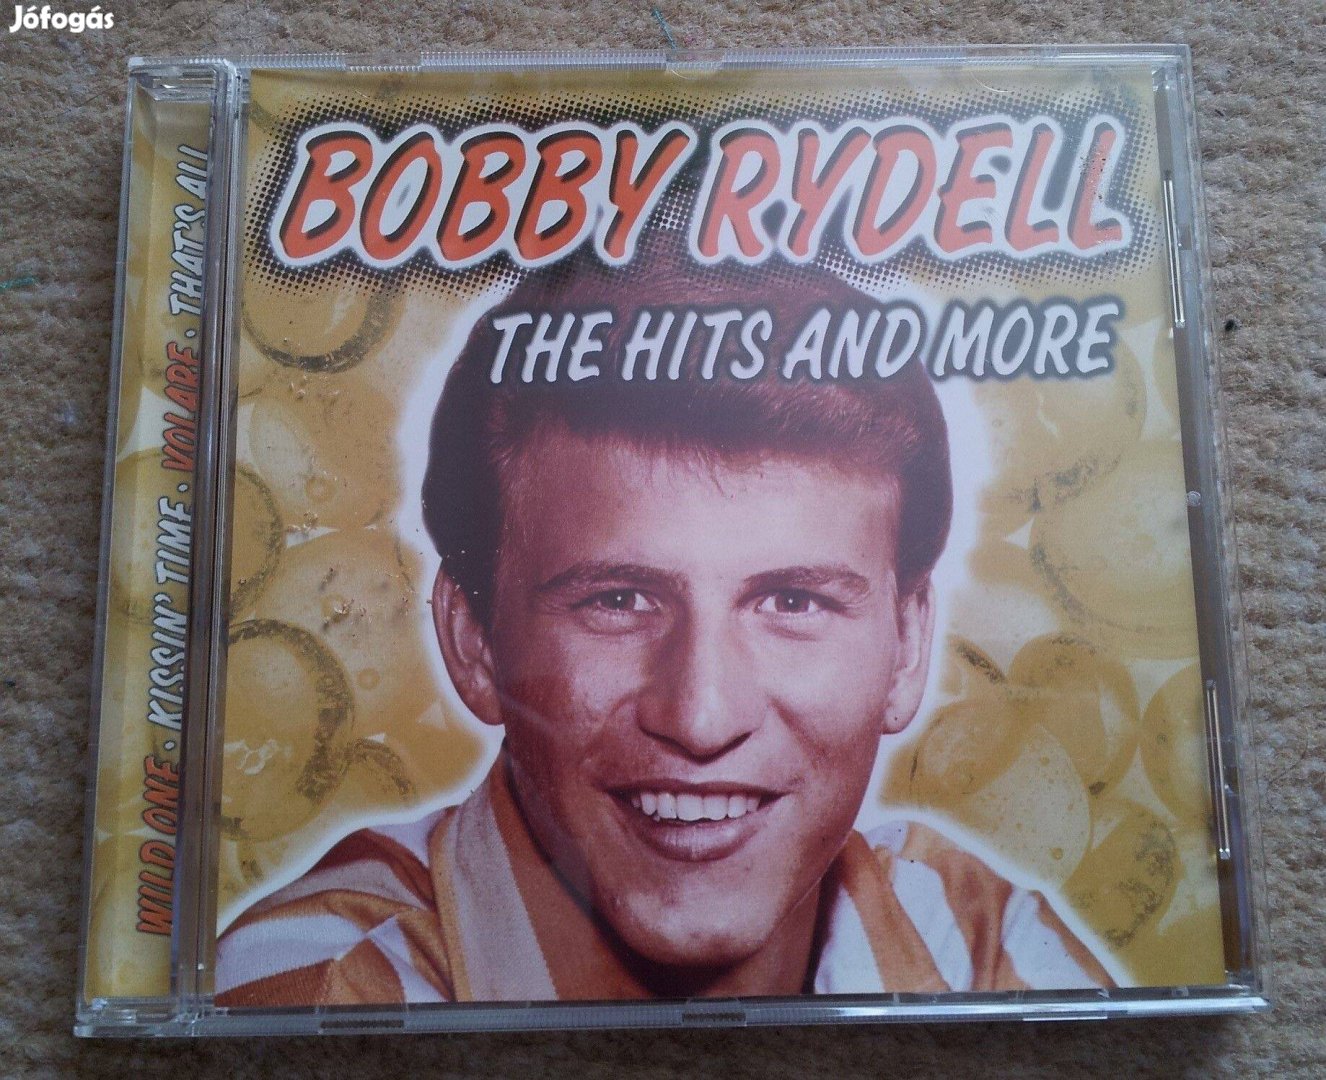 Bobby Rydell - The hits and more cd